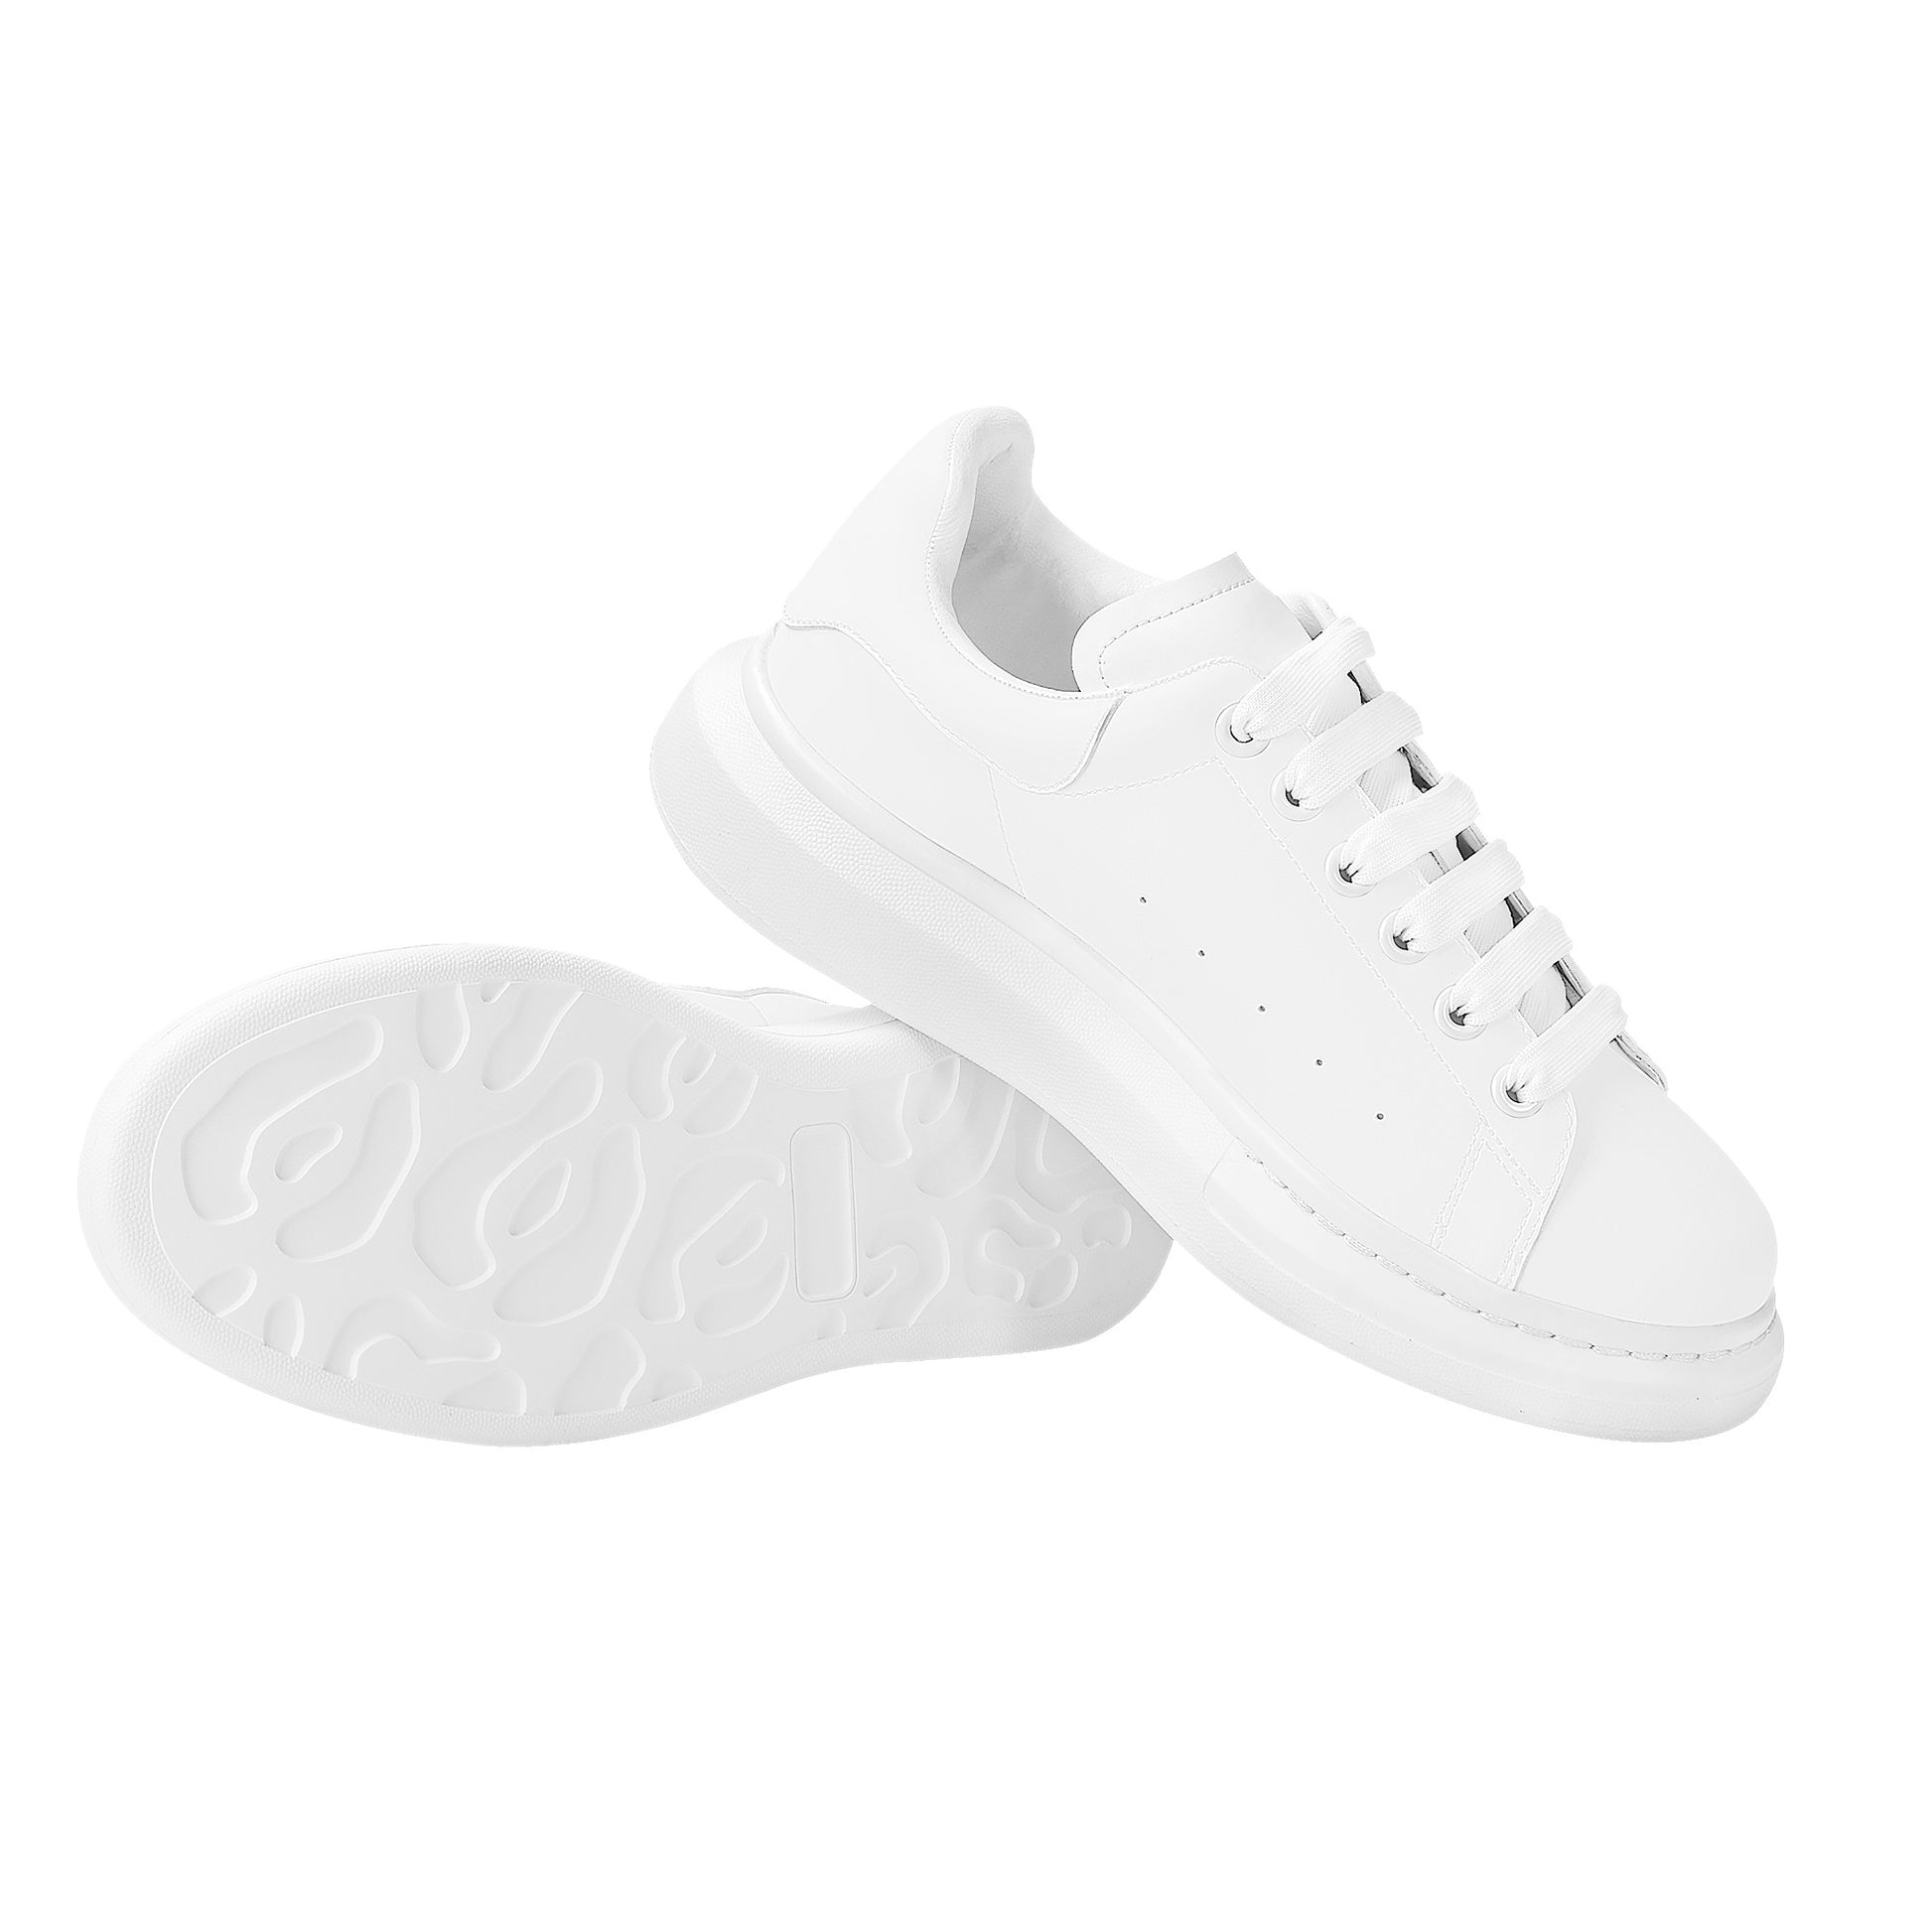 Create Your Own - Platform Low Top Shoes - White - HayGoodies - shoes